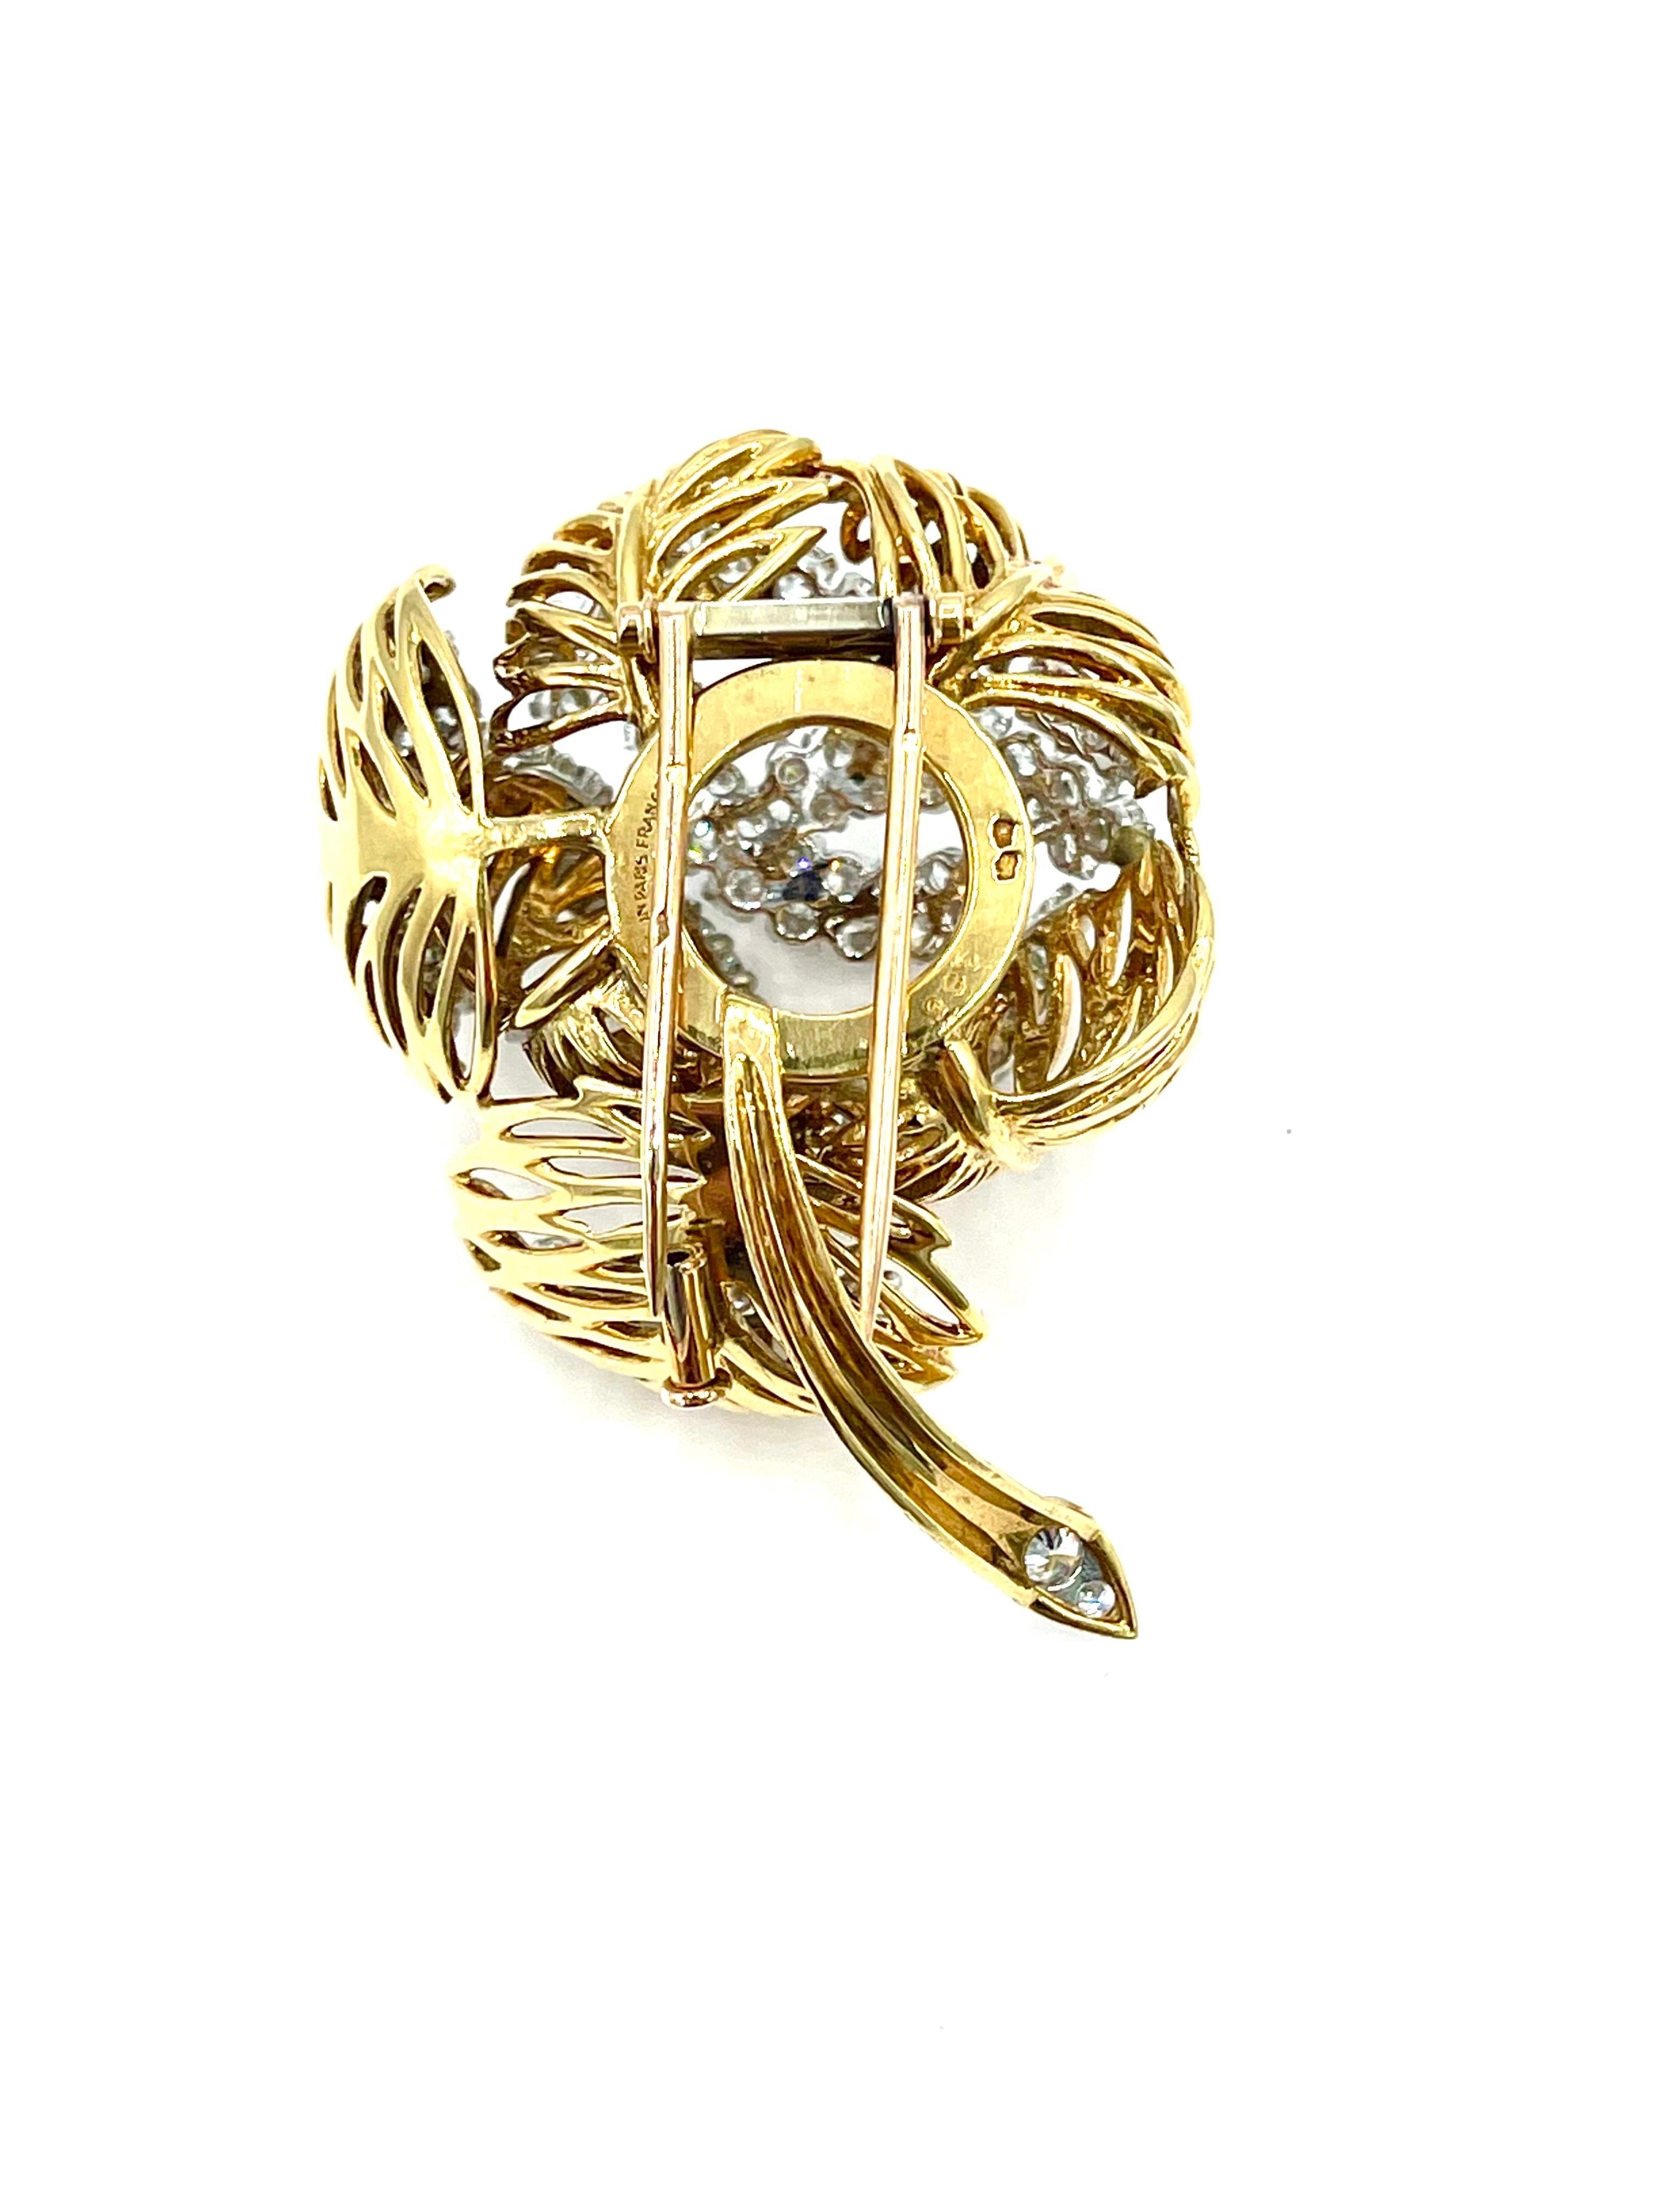 Round Cut 8.05 Carat Round Brilliant Diamond French Made Flower Brooch For Sale